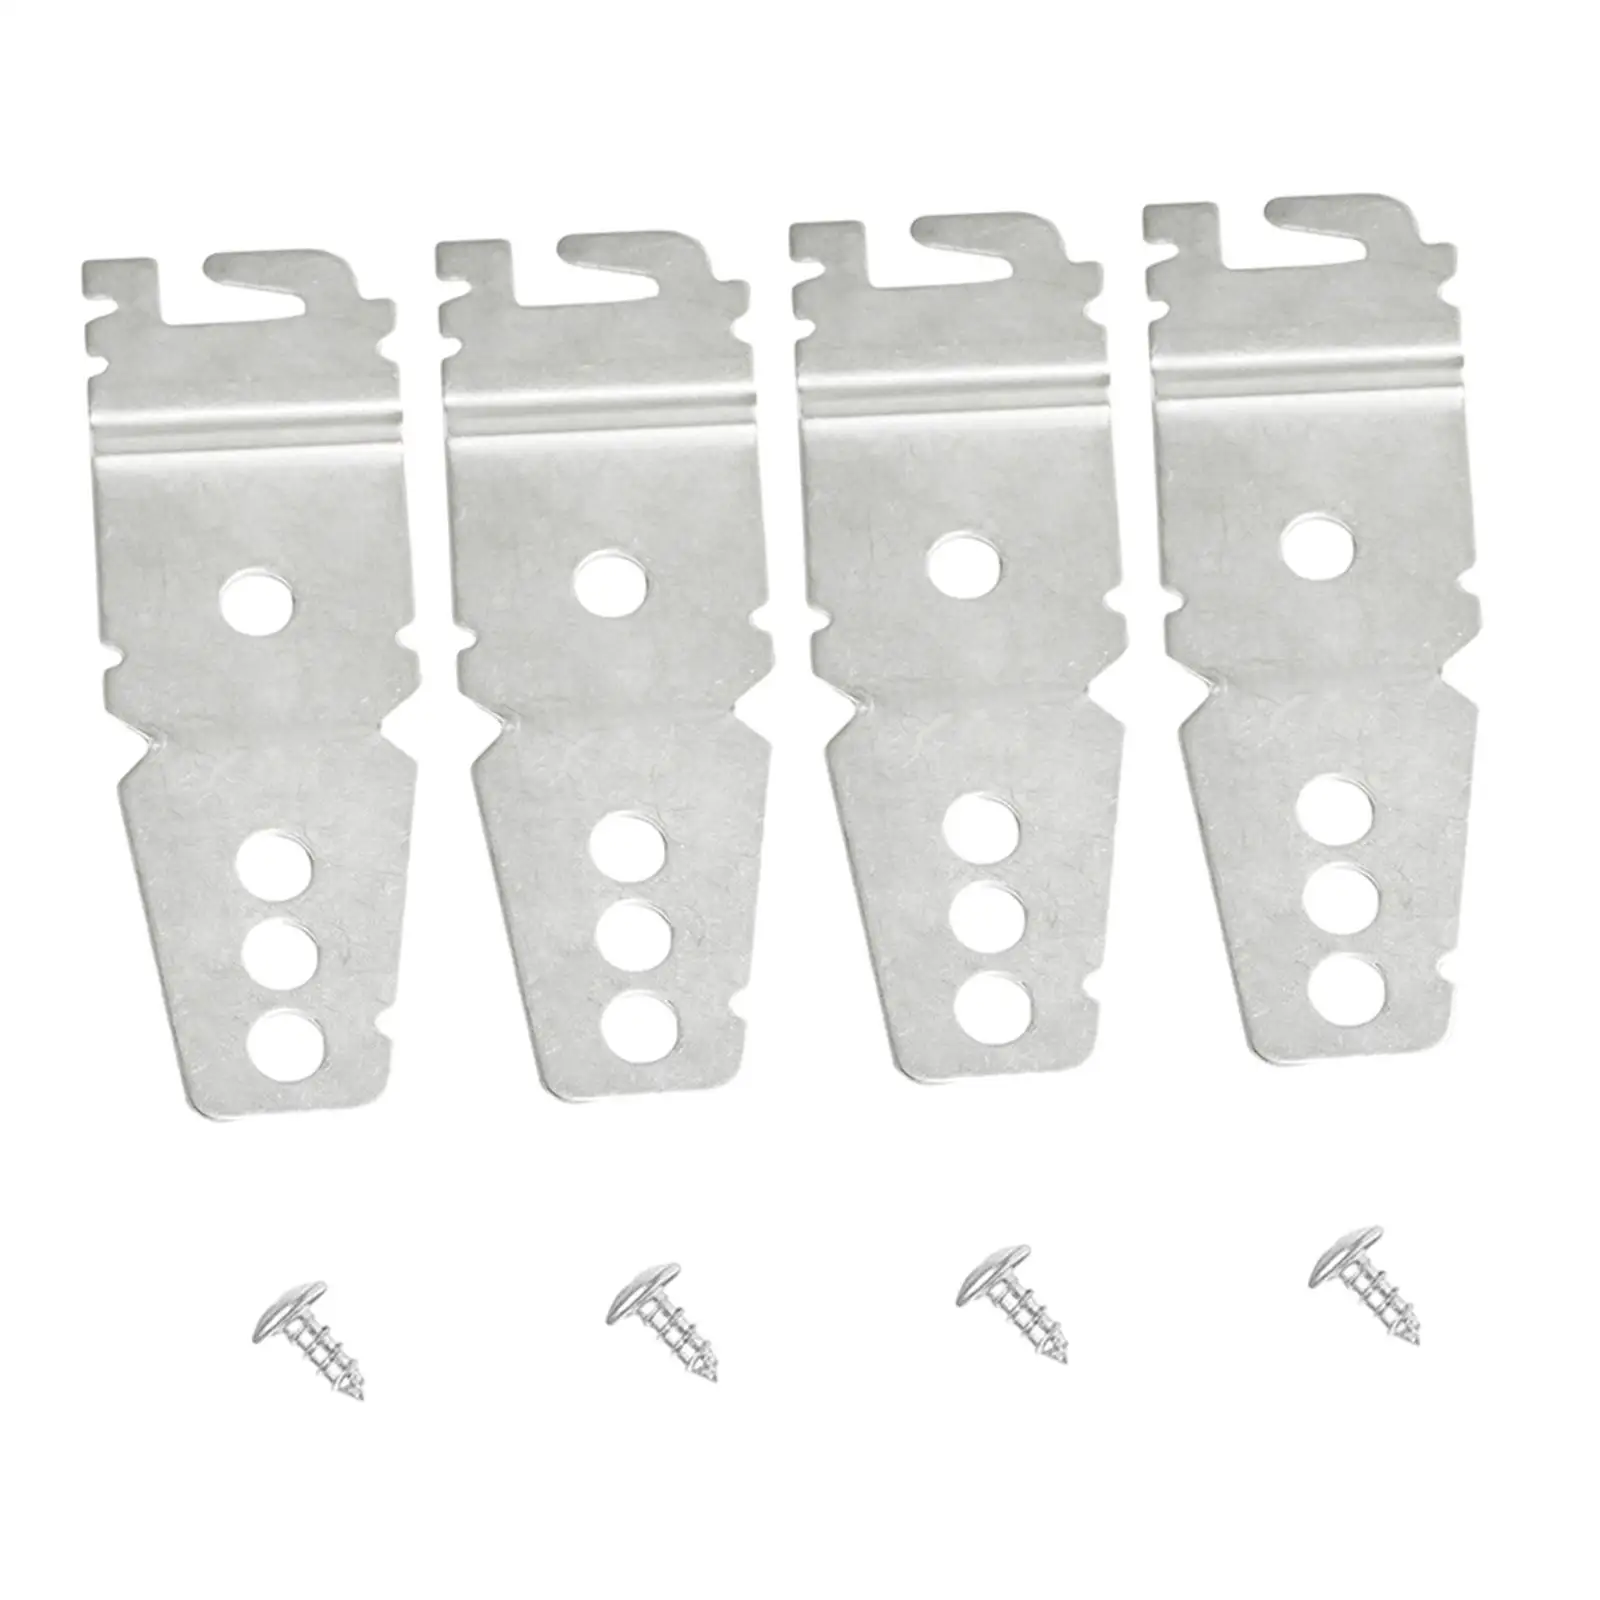 4 Pieces 8269145 Dishwasher Mounting Bracket Stable Performance with Screws Parts Replacements for WP8269145 AP3039168 PS393134